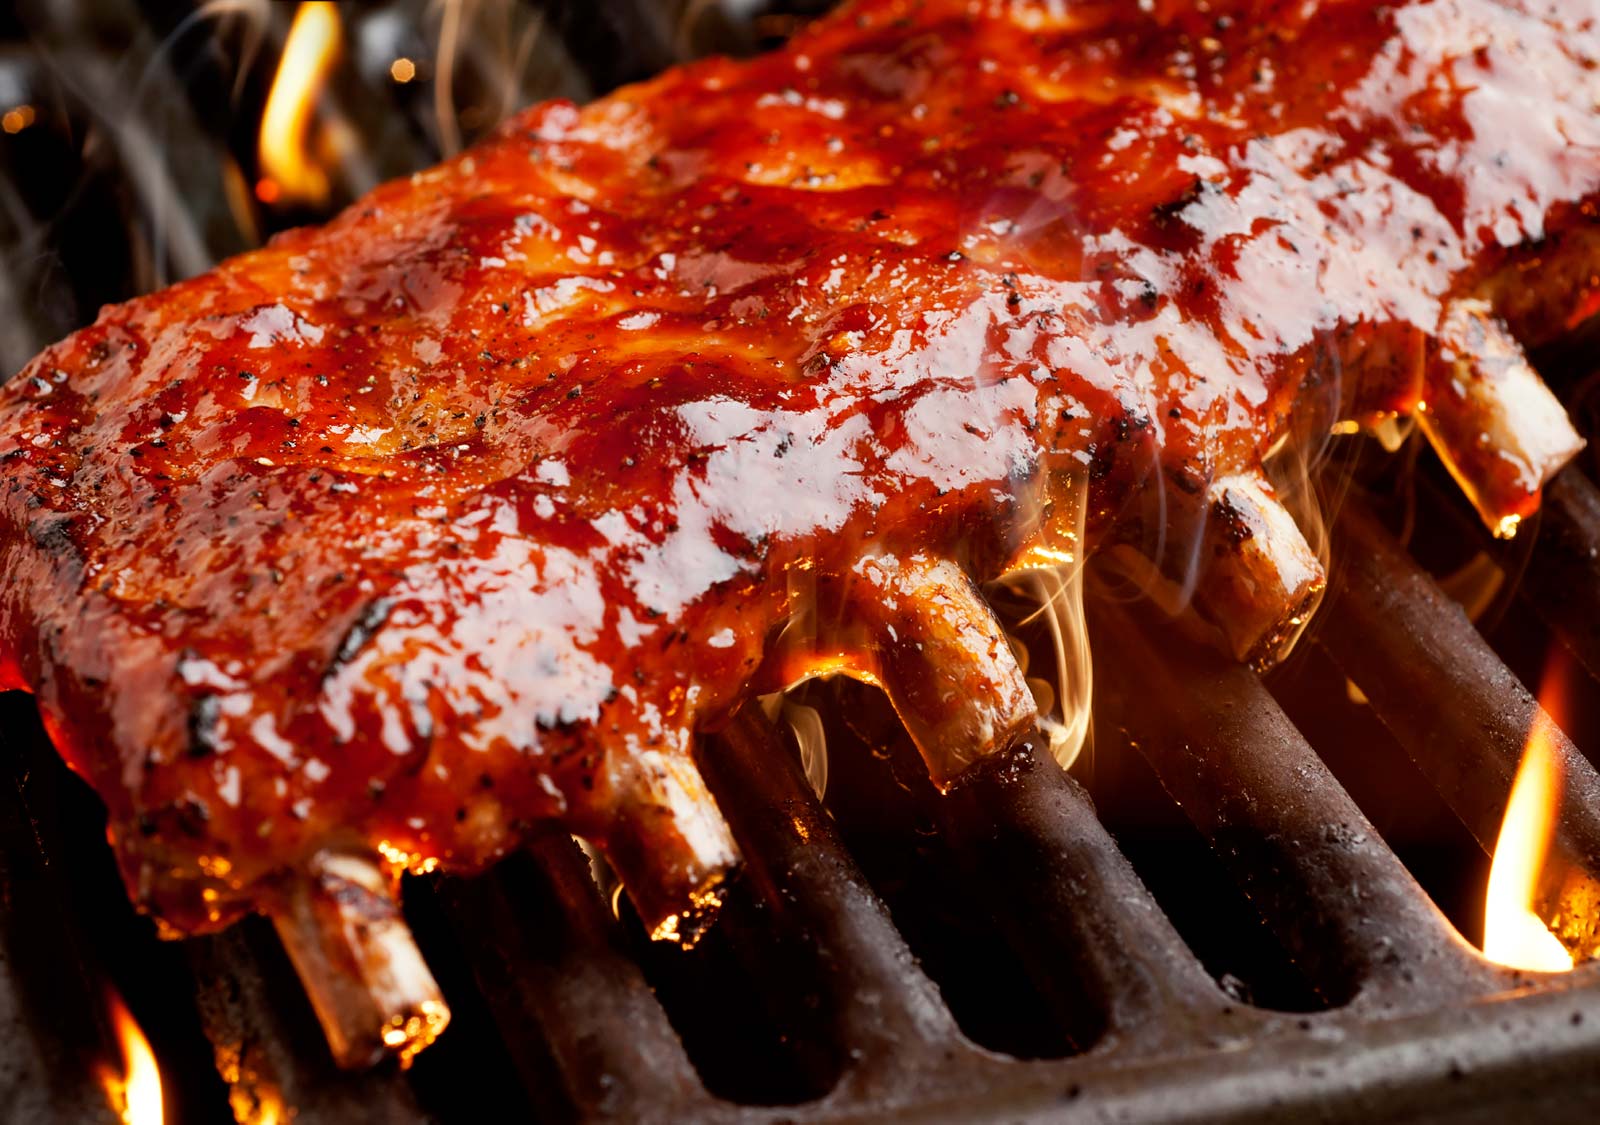 🍖 Can We Guess Your Age and Gender Based on the Meats You’ve Eaten? Barbecue ribs